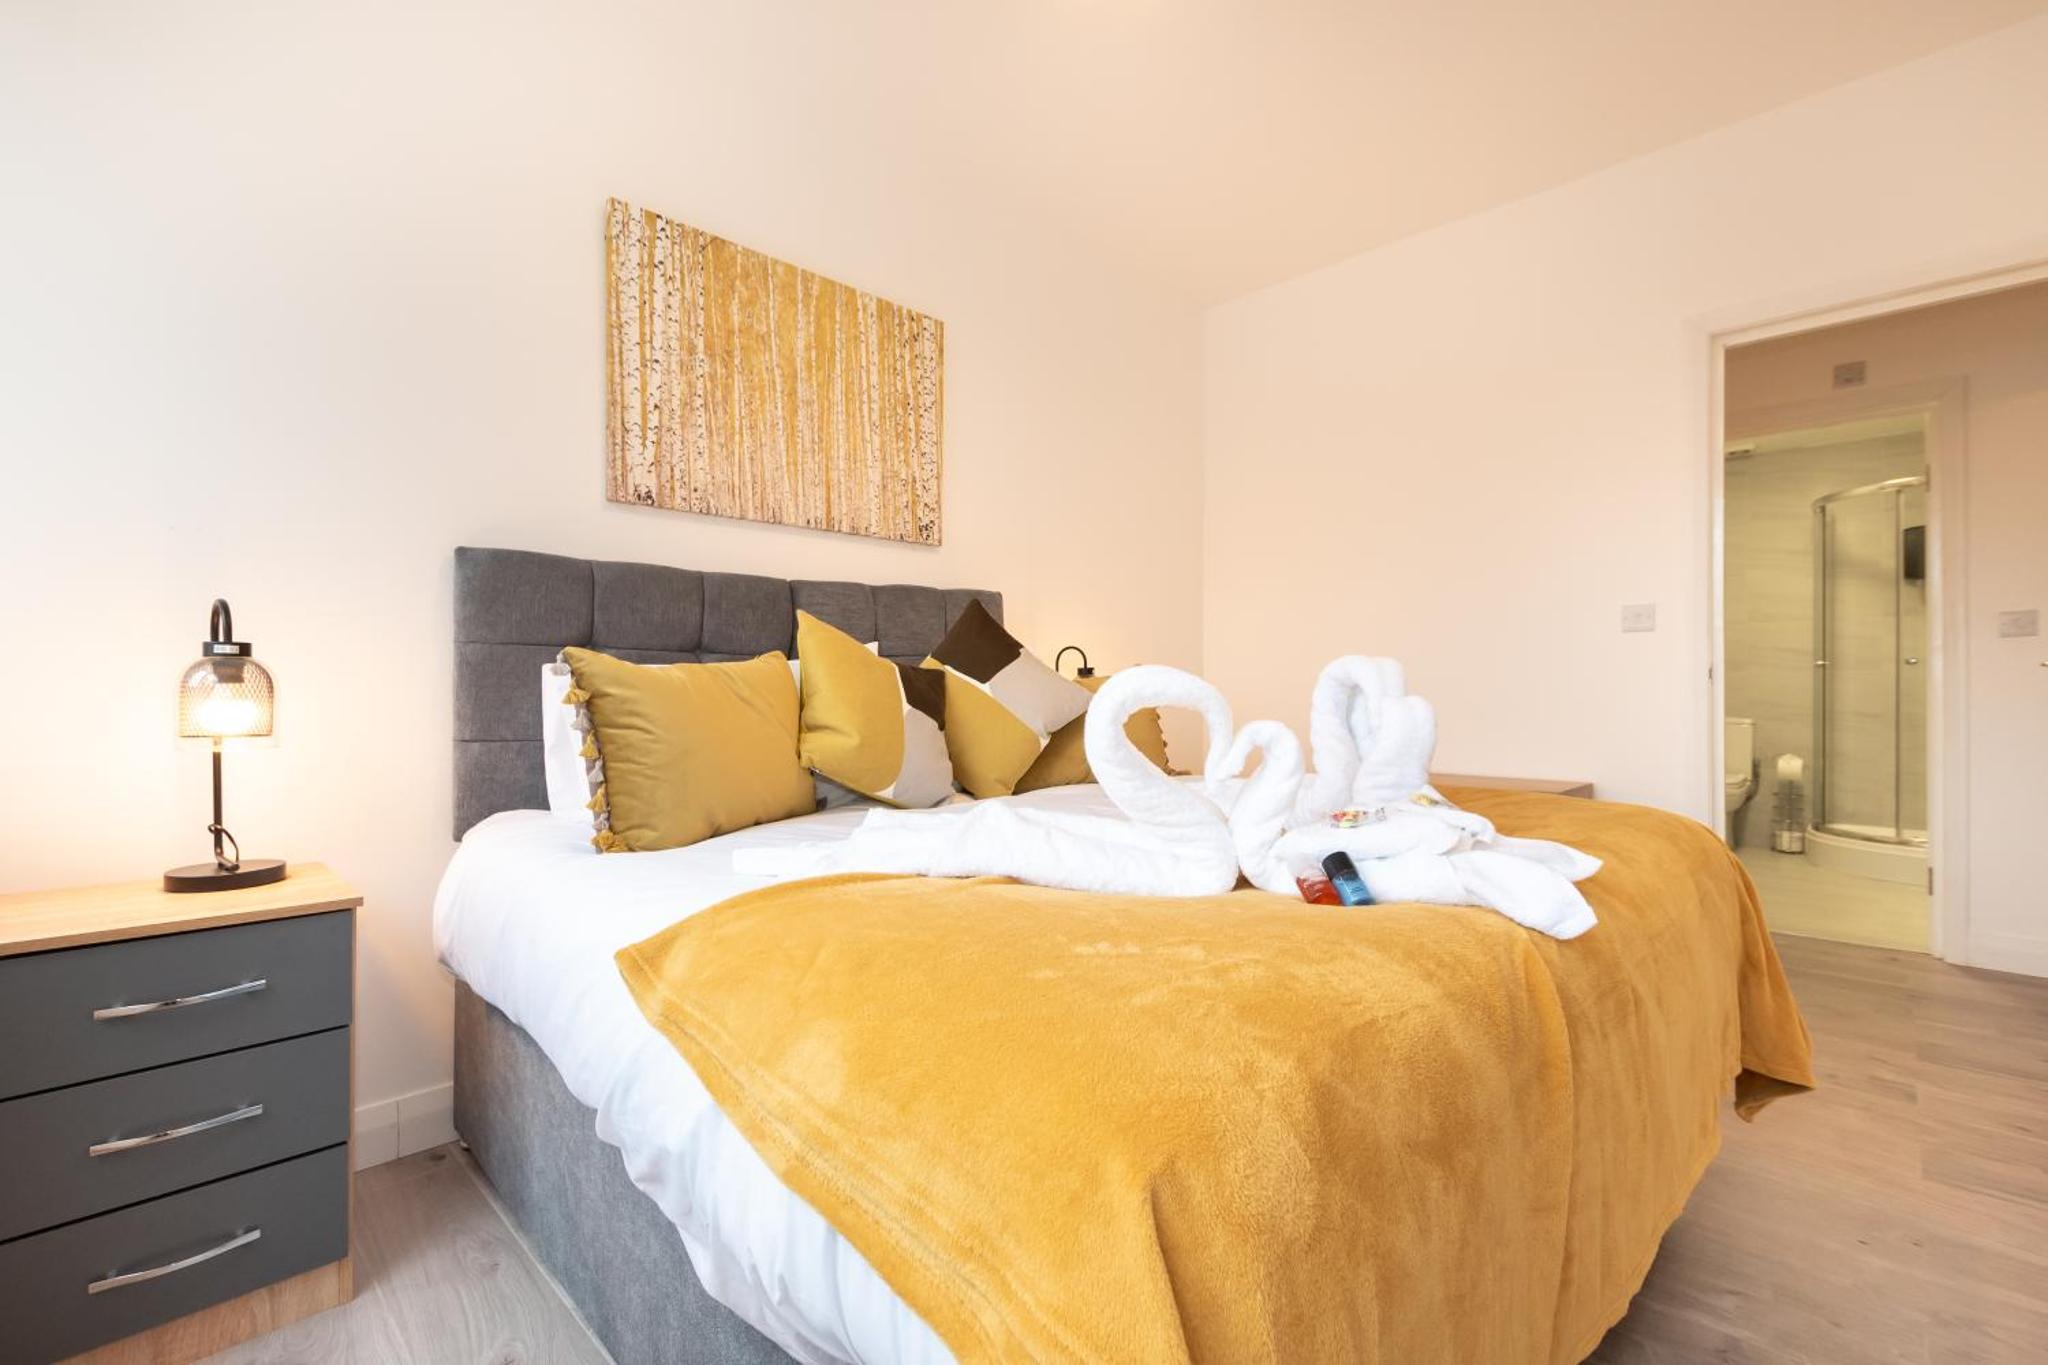 Best Price - Superb Brand New Southampton City Apartments, Single Beds Or King Size & Sofabed - Amazing Location Free Parking